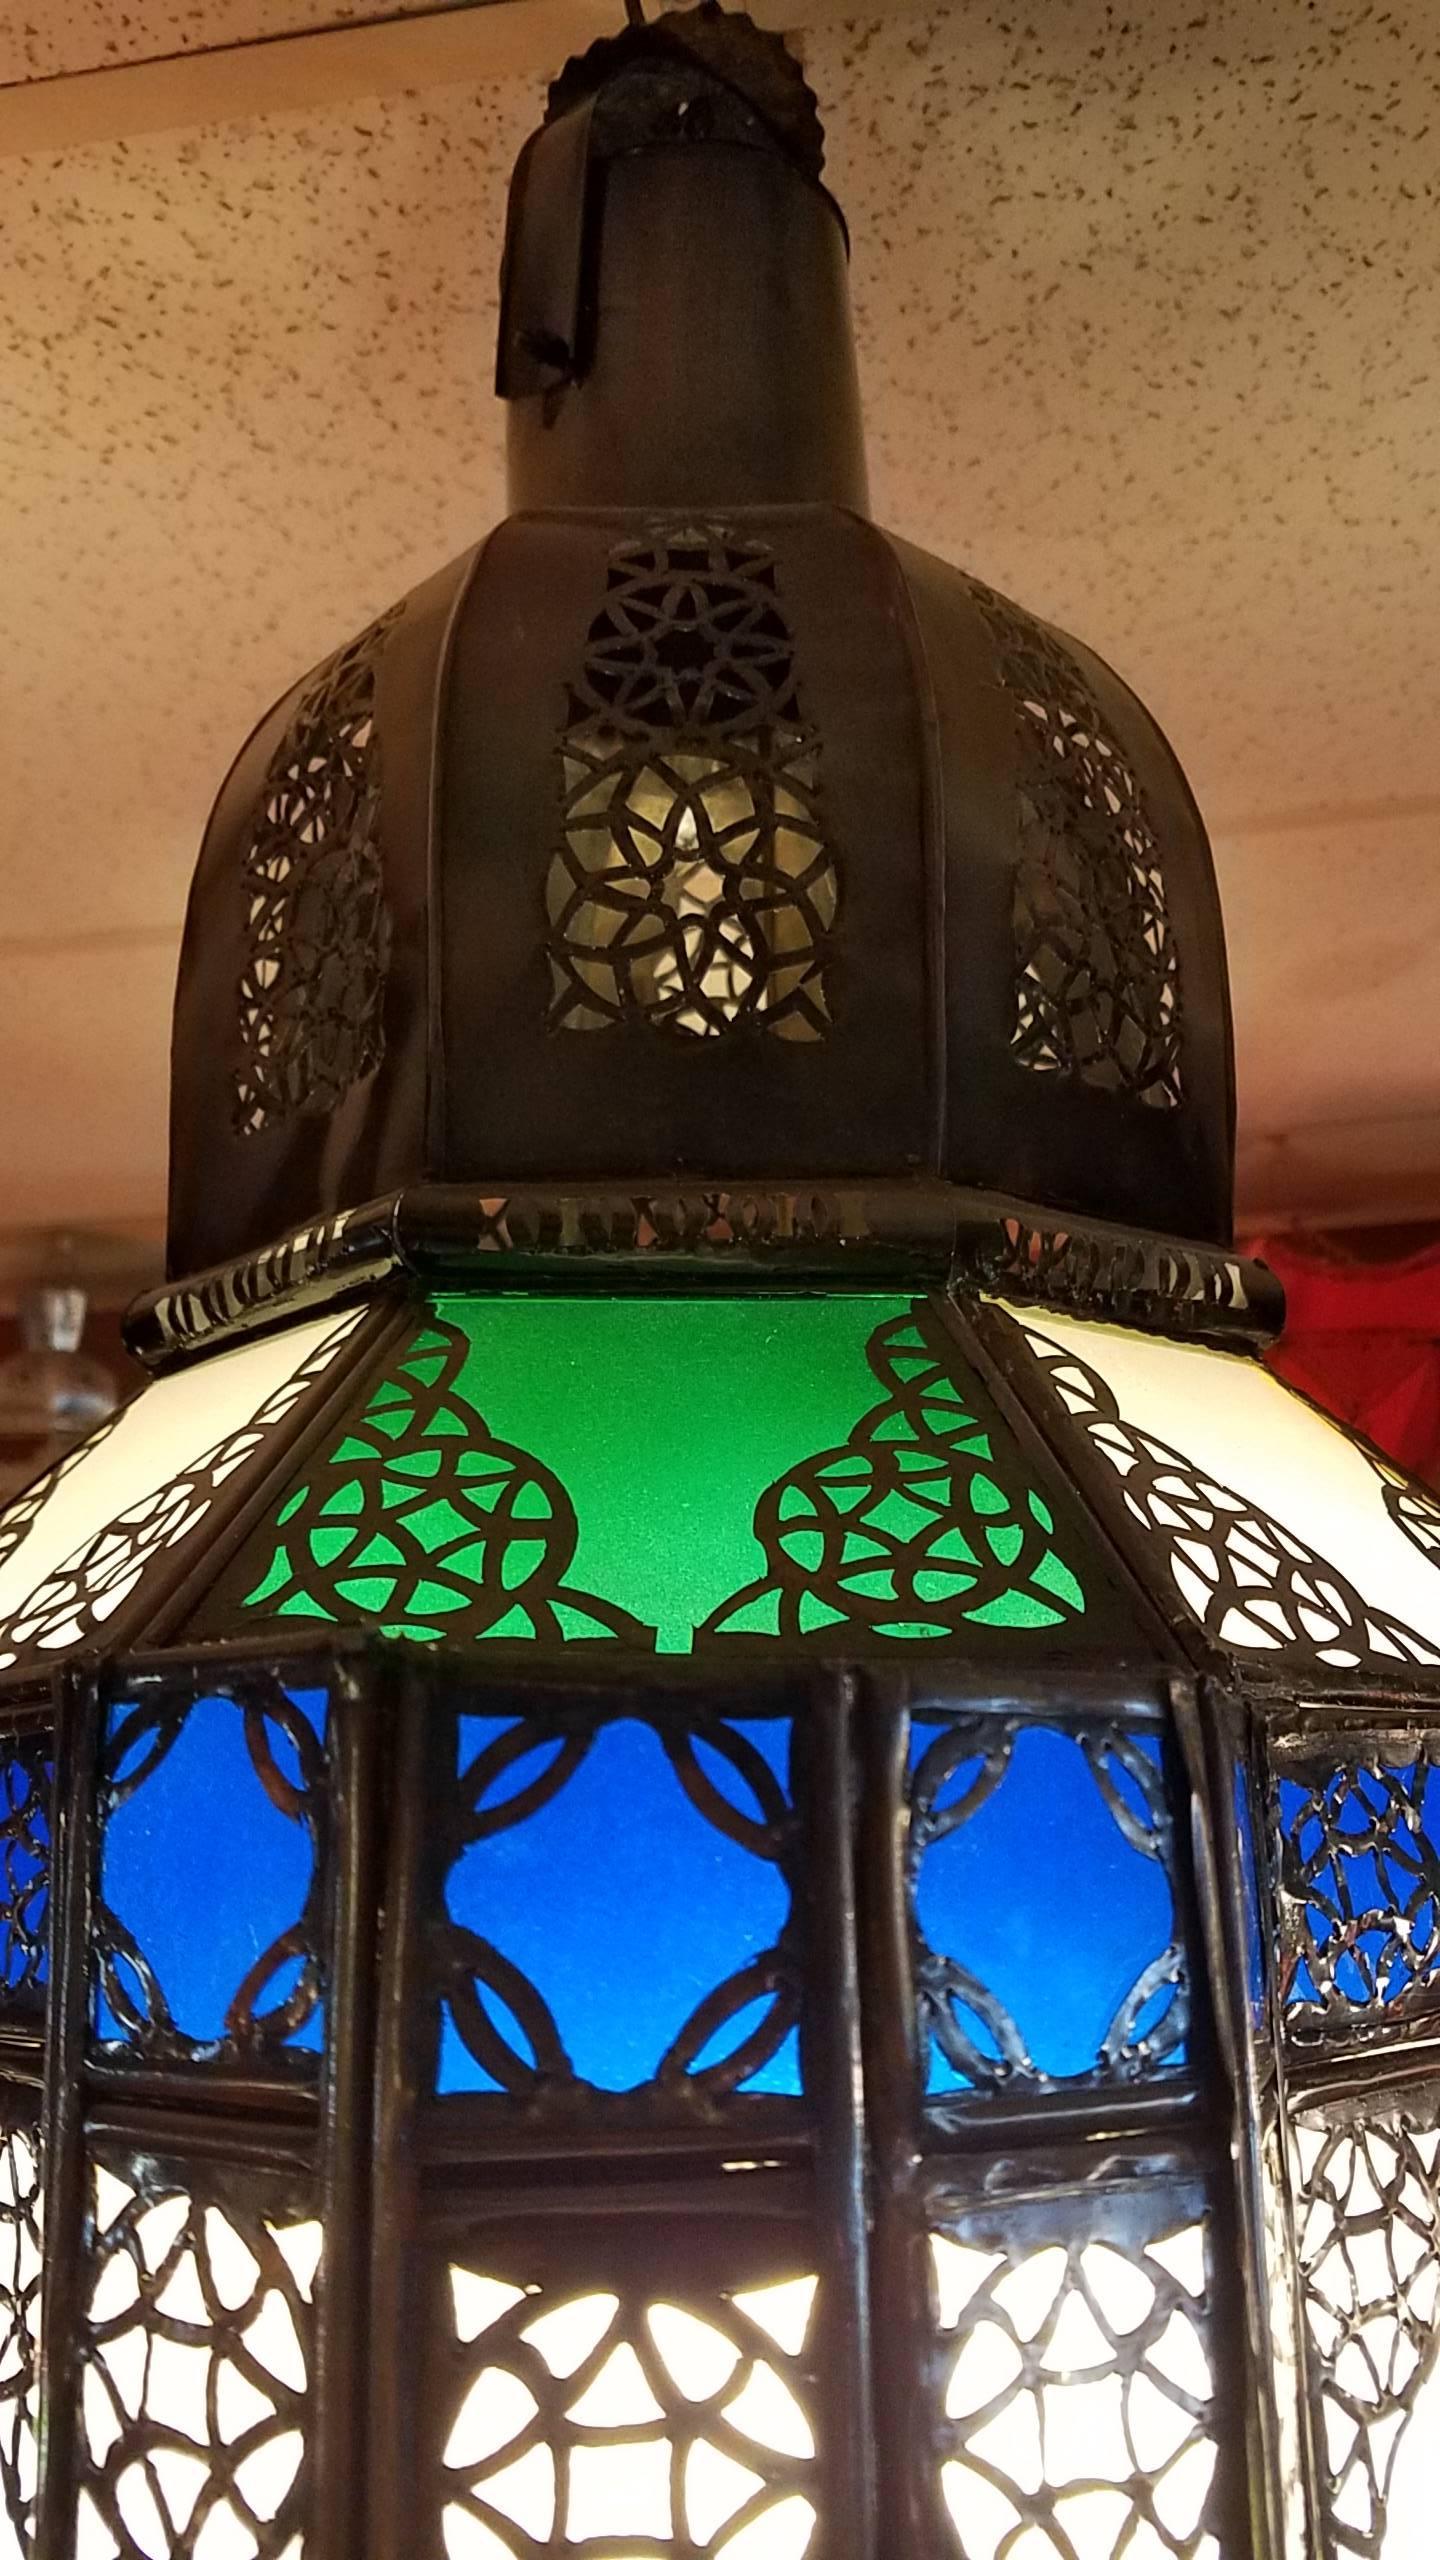 This is a beautiful Moroccan glass lantern, featuring frosty white glass panels, and many green, blue, and amber small glass patches. The metal frame is pierced throughout, to give the lantern an exquisite look from far as well as from up close.